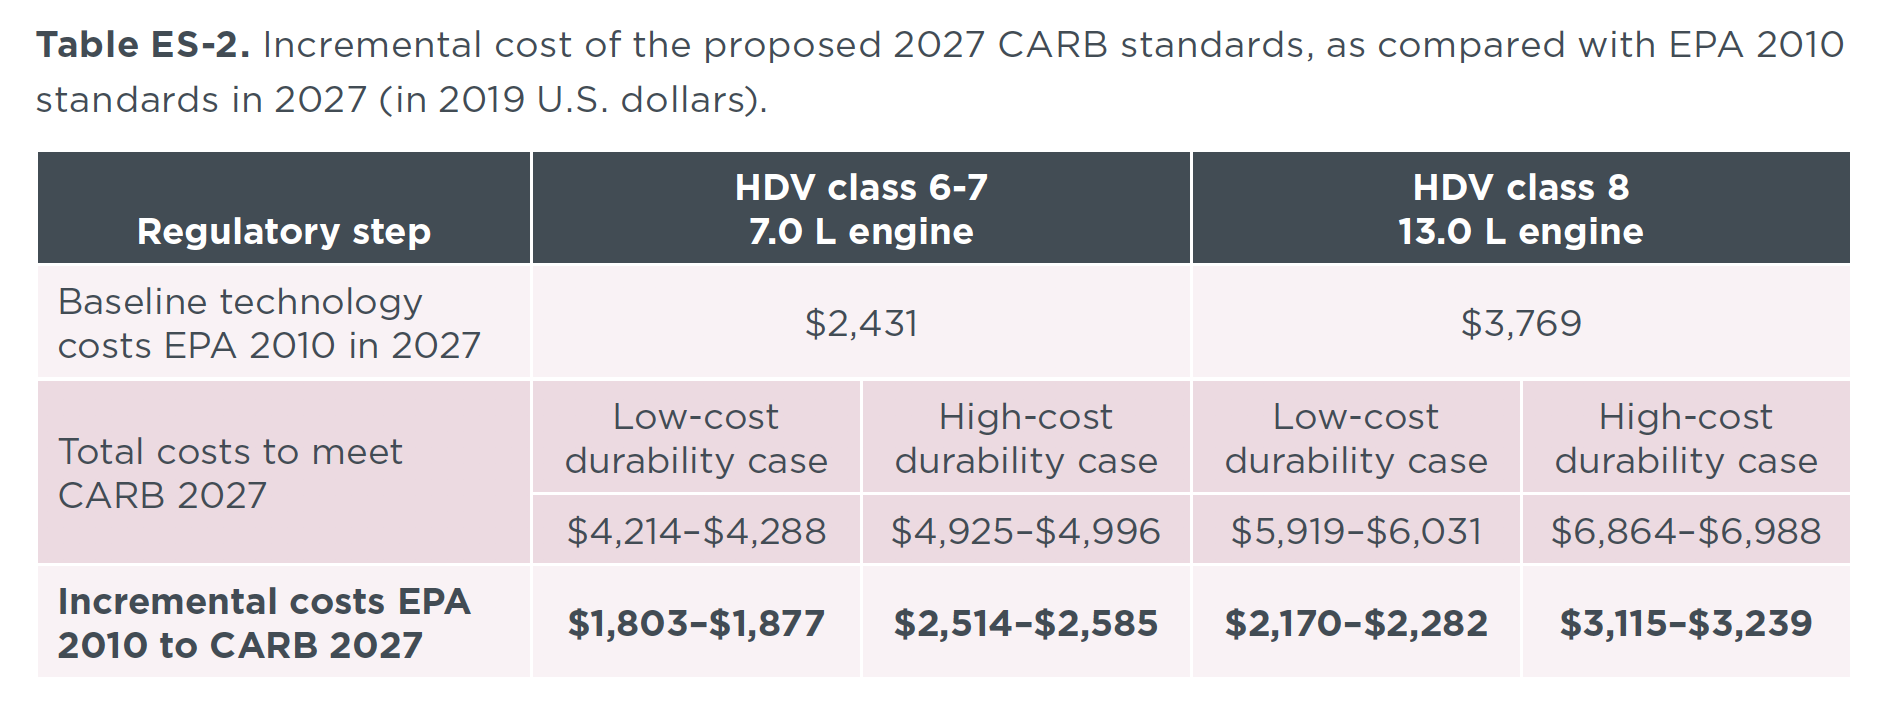 Table ES-2. Incremental cost of the proposed 2027 CARB standards, as compared with EPA 2010 standards in 2027 (in 2019 U.S. dollars).